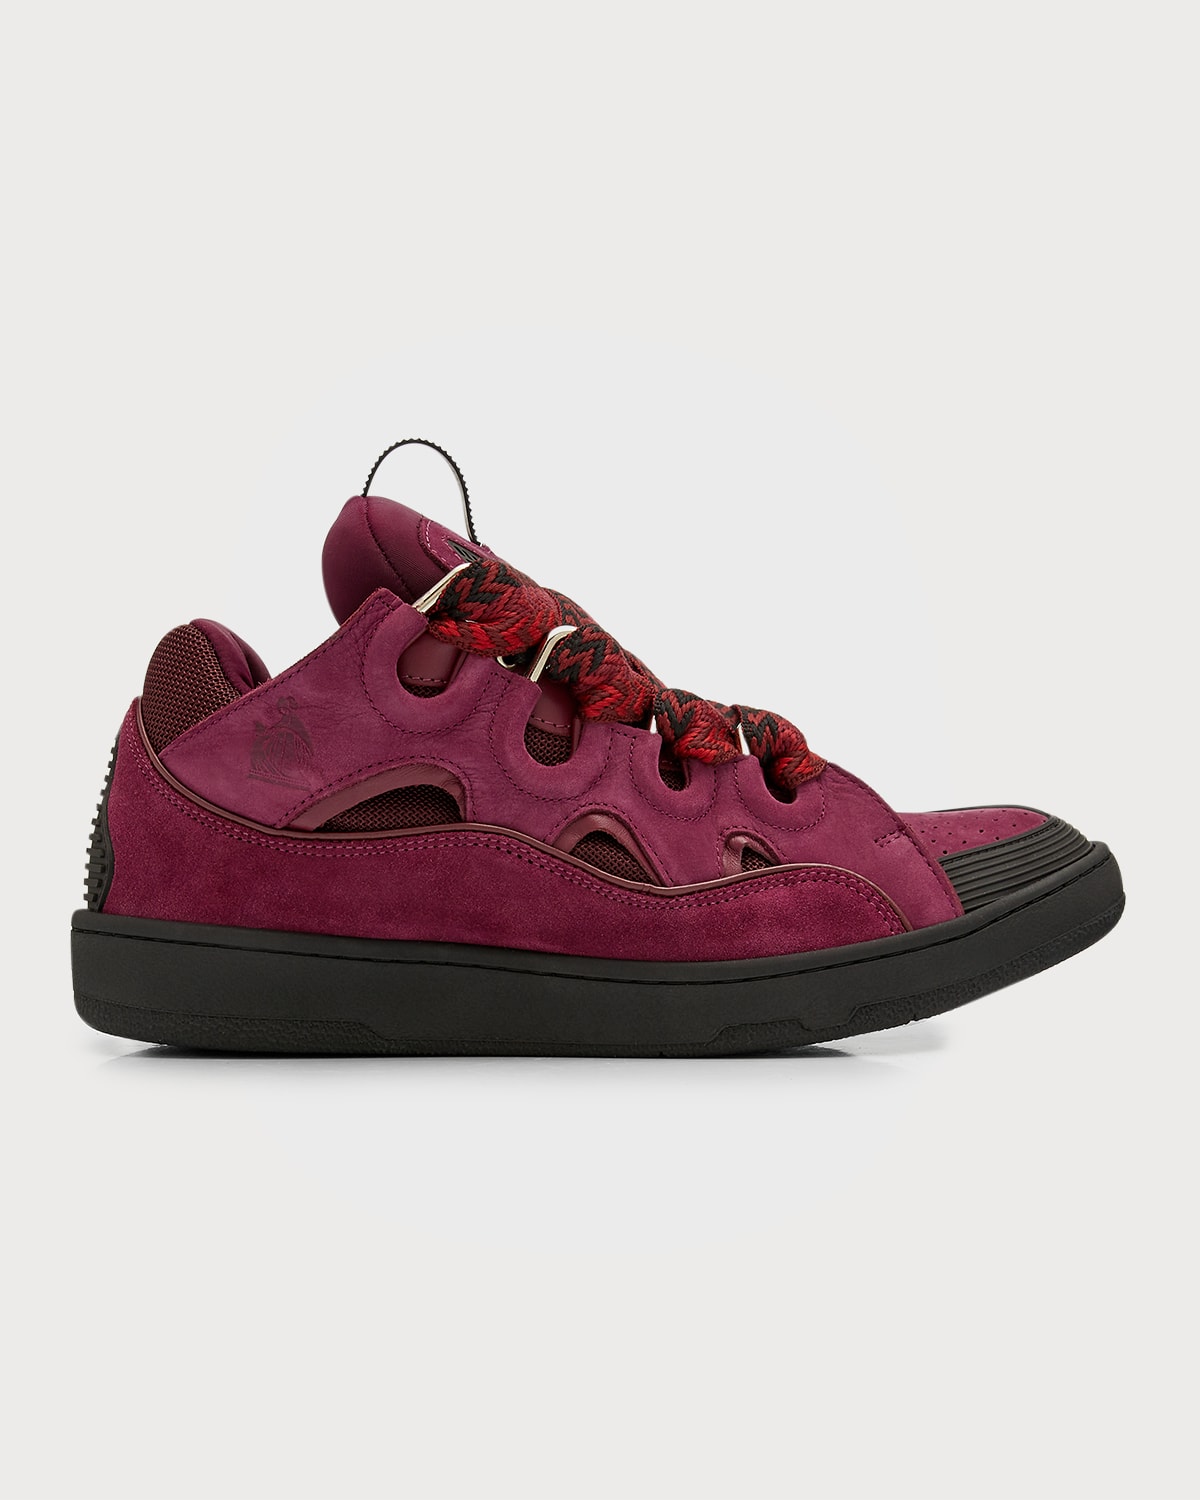 Lanvin Men's Tonal Textile And Leather Low-top Curb Sneakers In Plum